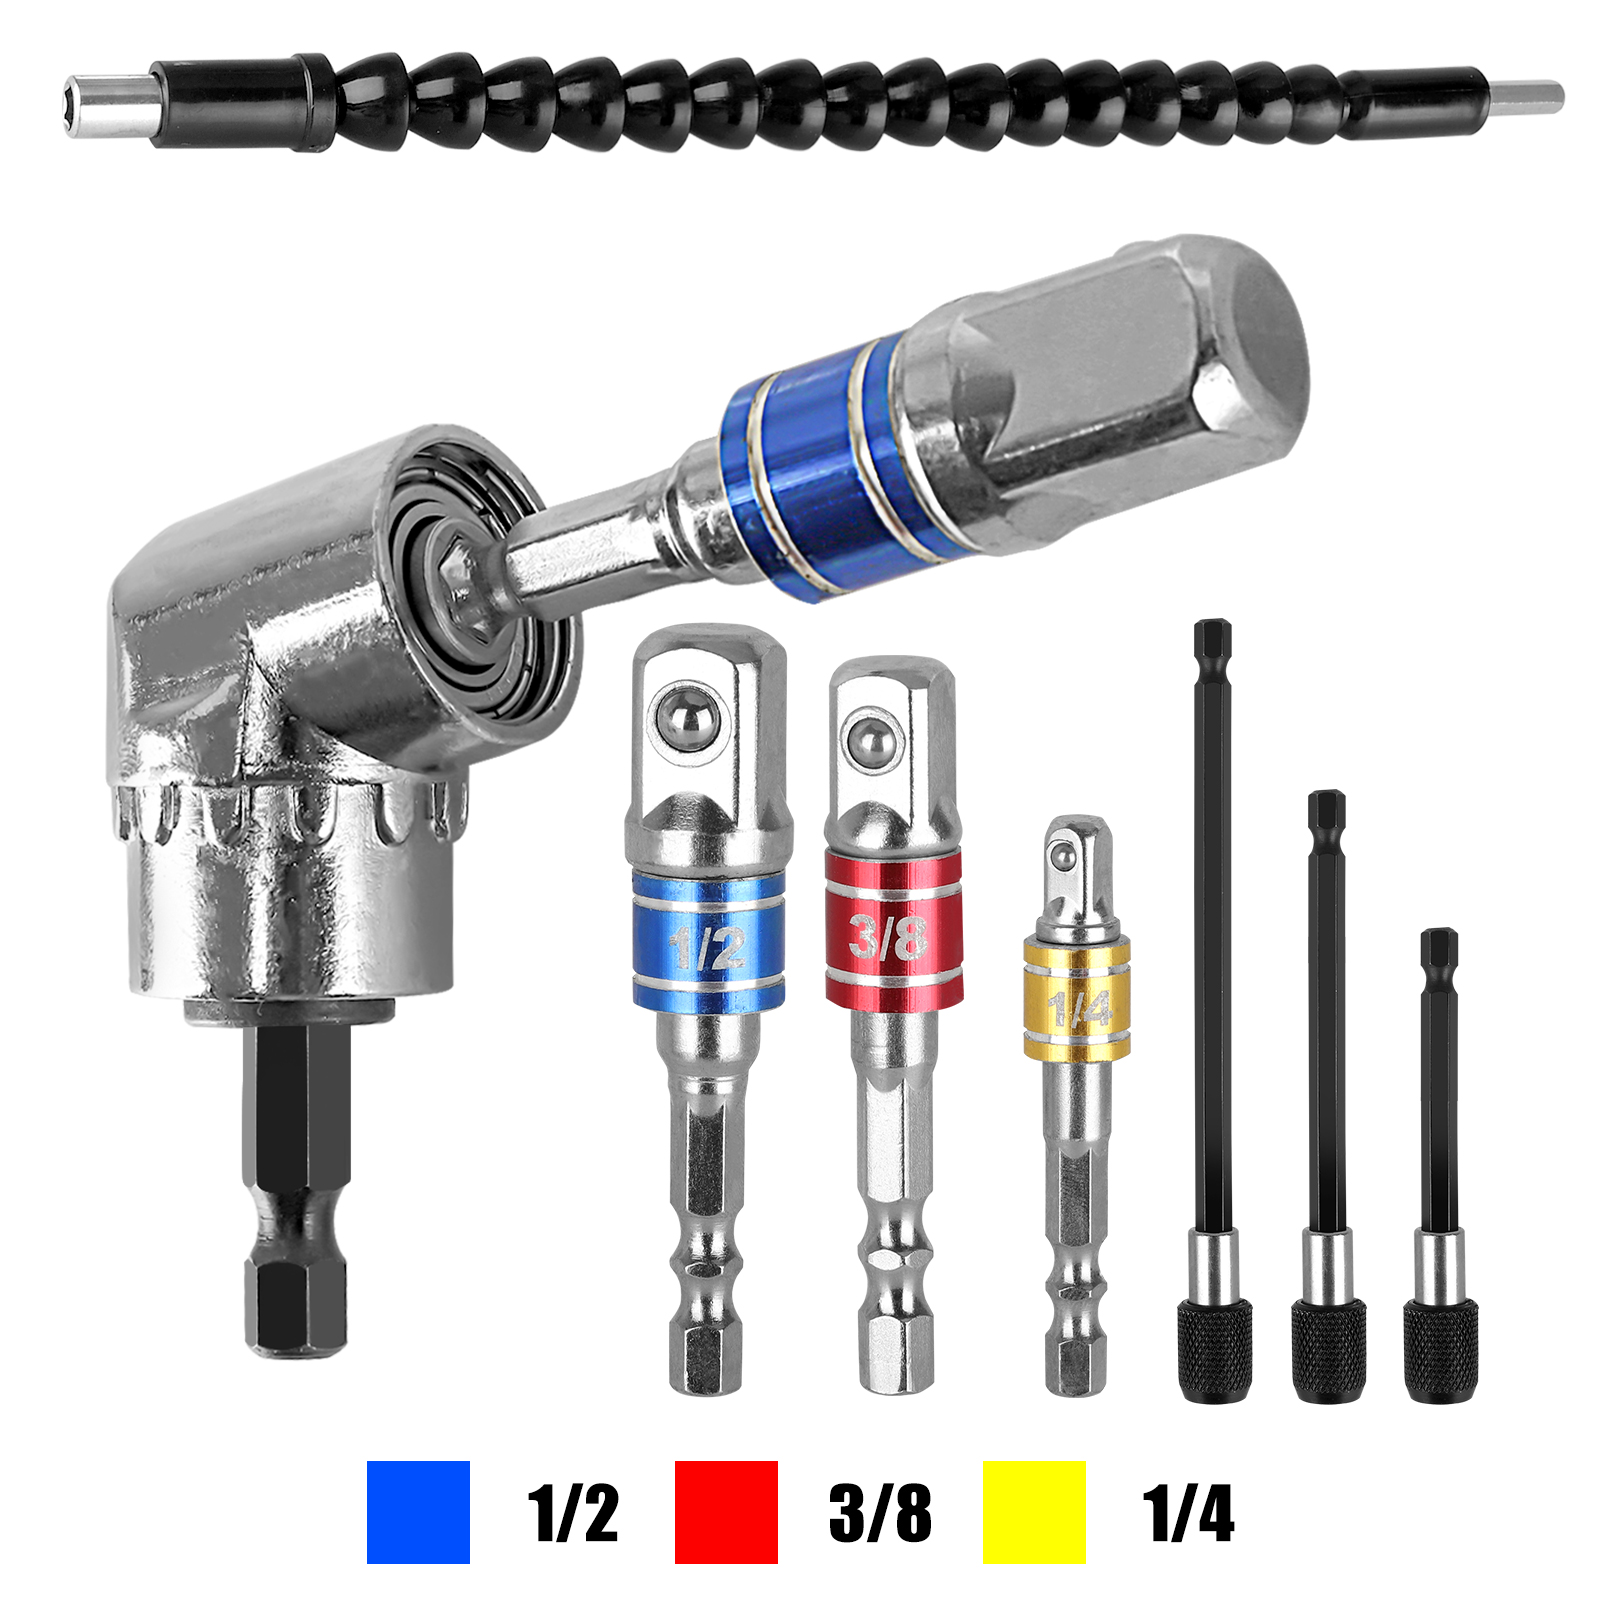 1//4 Hex Extension Bit Holder Set Magnetic For Power Drills Impact Drivers